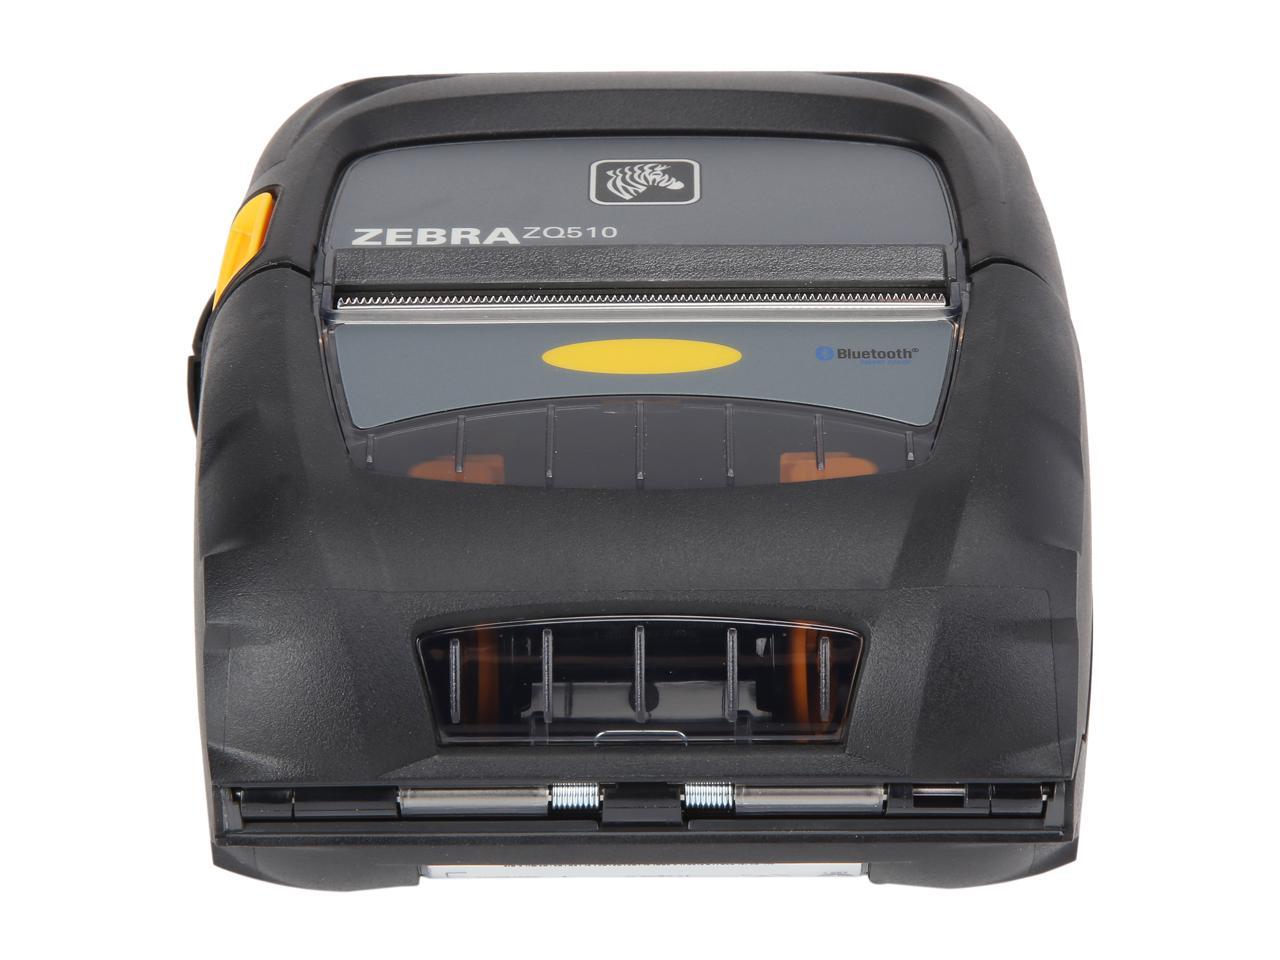 Zebra Zq510 3 Mobile Direct Thermal Receipt And Label Printer 203 Dpi Bluetooth 40 Linered 9304